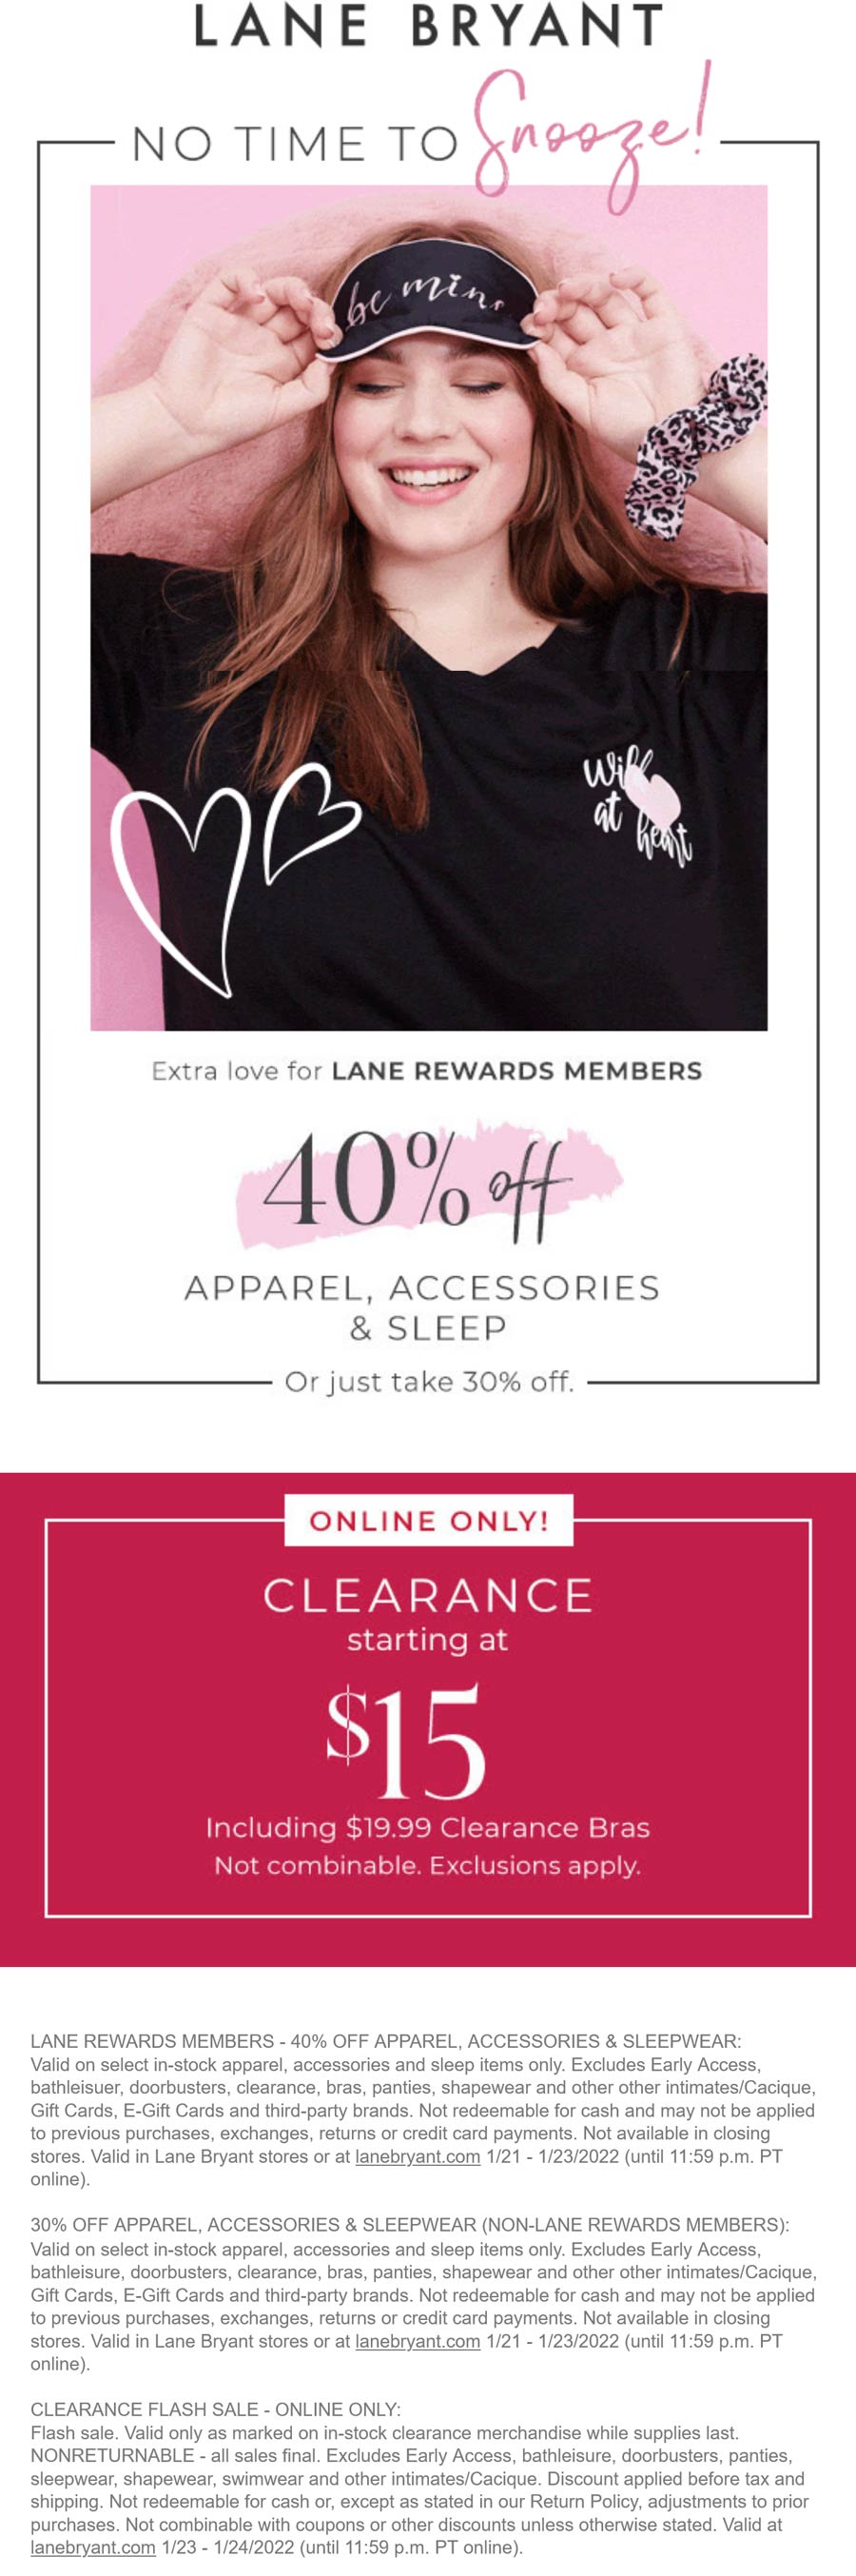 Lane Bryant stores Coupon  30-40% off today at Lane Bryant, ditto online #lanebryant 